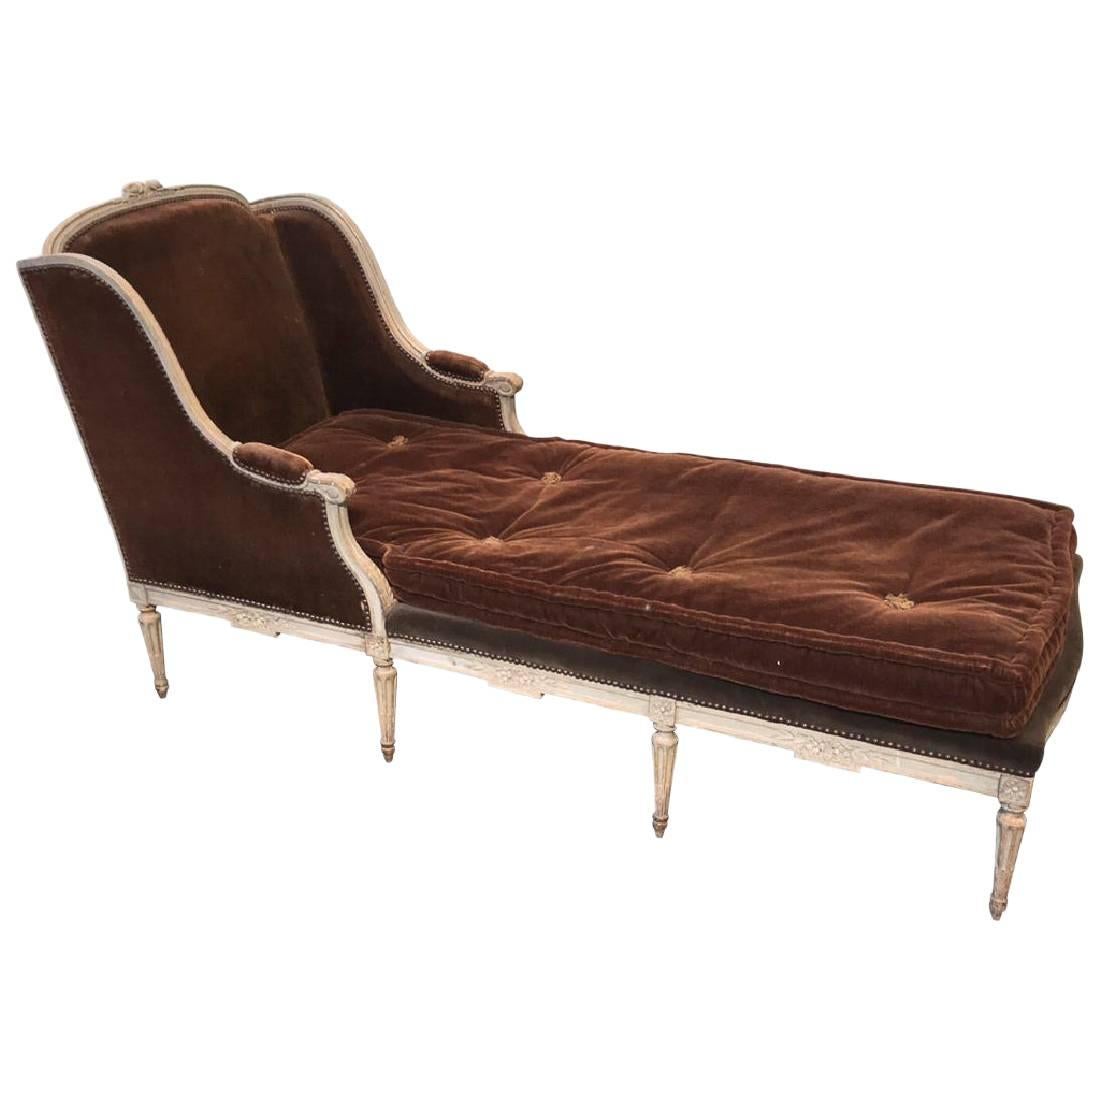 19th Century French Louis XVI Style Chaise Longues